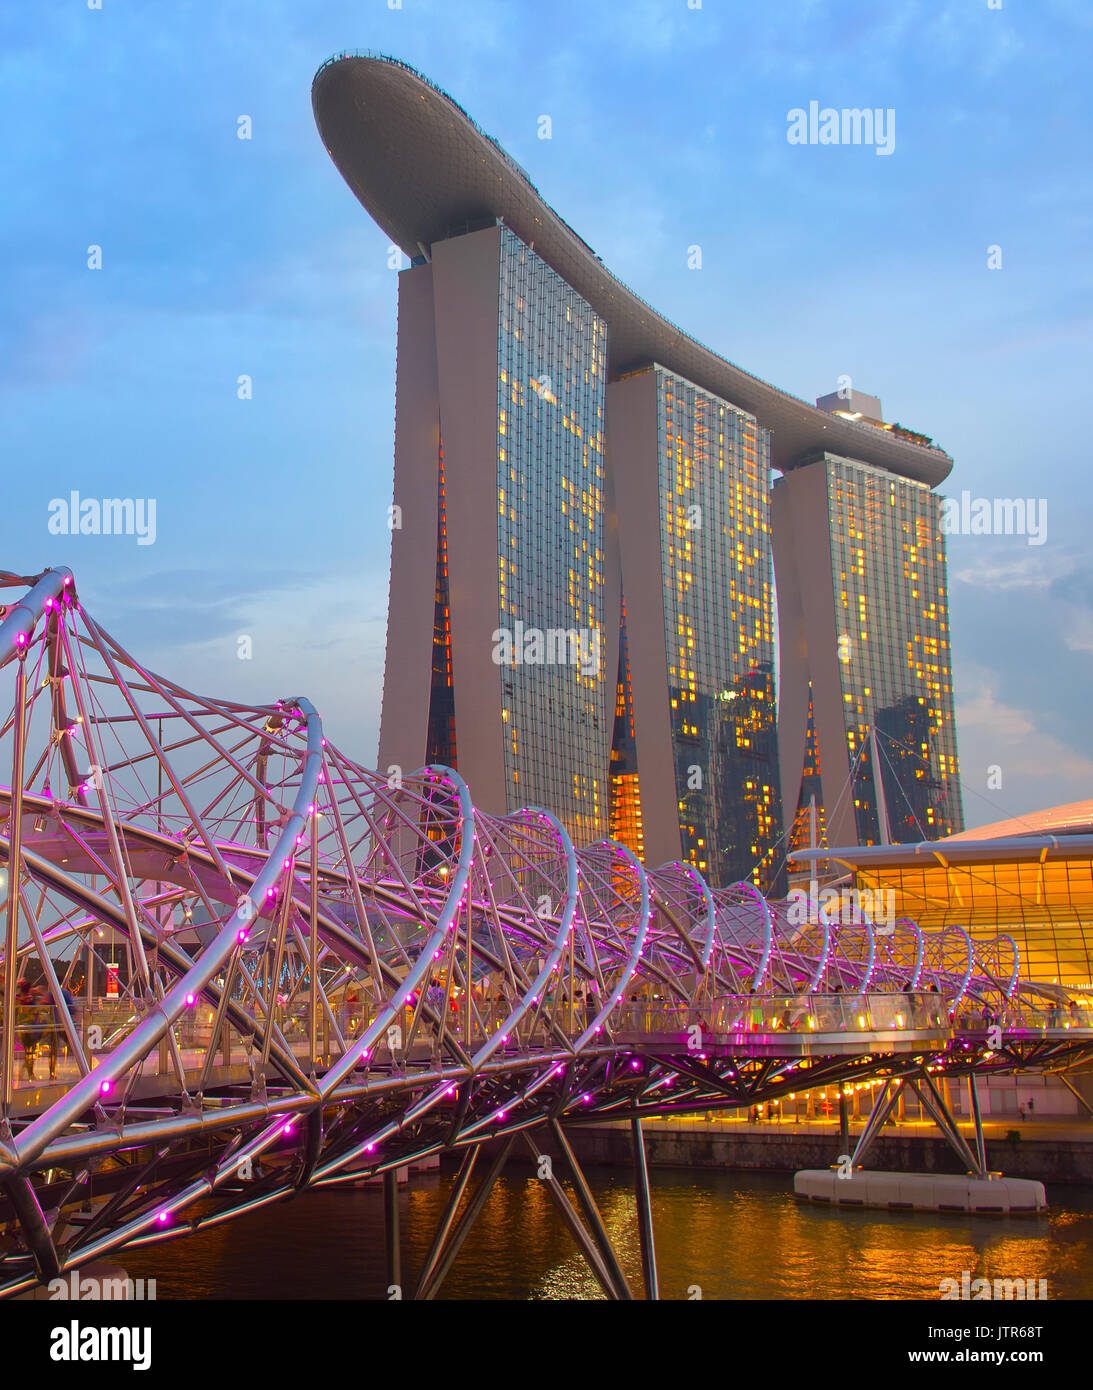 SINGAPORE - JAN 13, 2017: Helix bridge and Marina Bay Sands Resort at twilight in Singapore. Marina Bay as the world's most expensive standalone casin Stock Photo